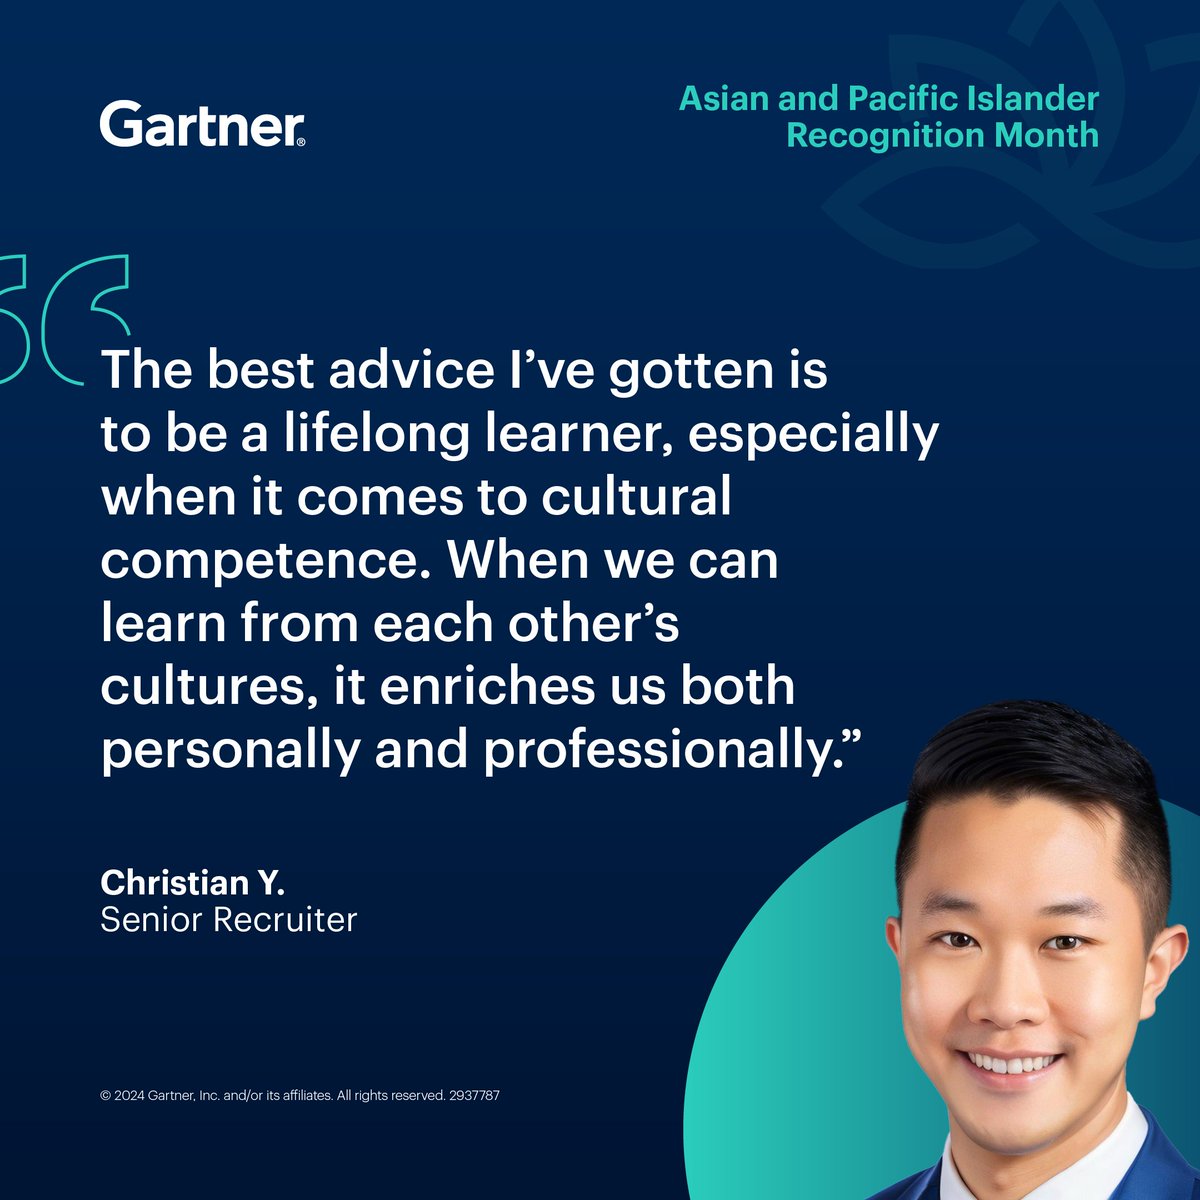 In recognition of Asian and Pacific Islander Recognition Month, we asked our associates to share how they show up authentically at work.

Read what Christian Y., Sr. Recruiter, had to say and learn more: gtnr.it/3wlYe5F

#LifeAtGartner #Inclusion